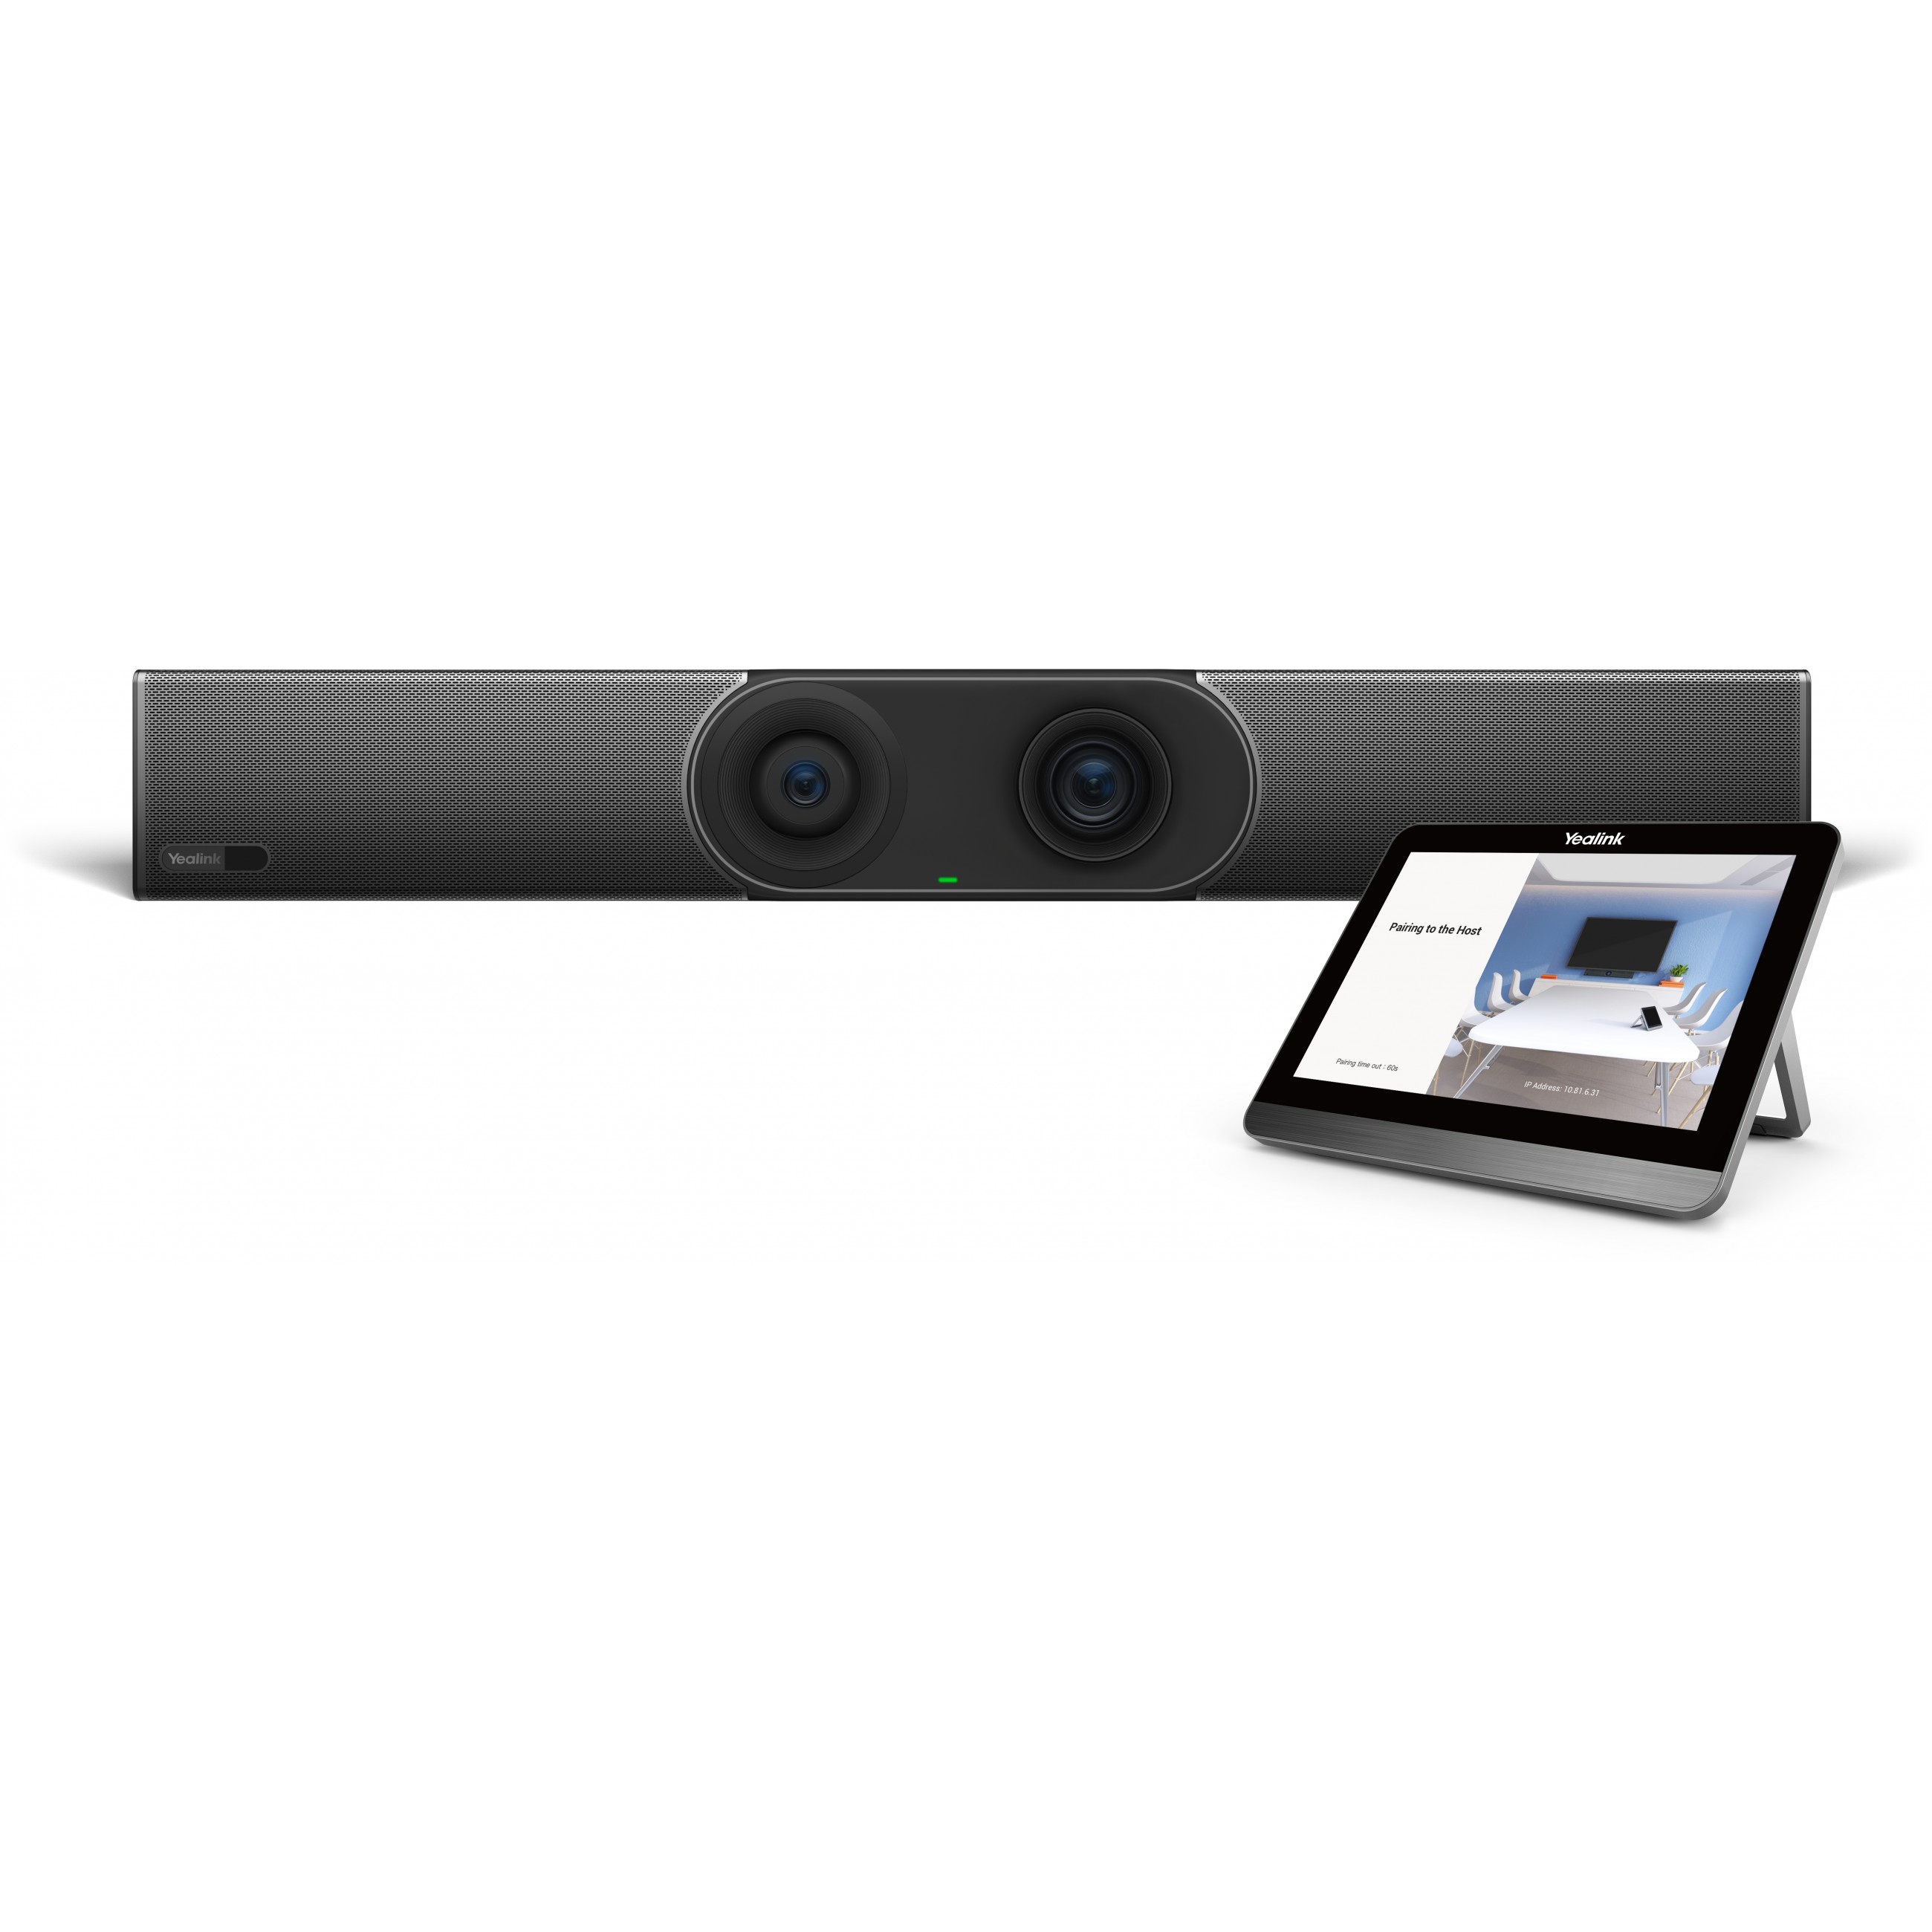 Yealink A30-020 video conferencing system - 1206653